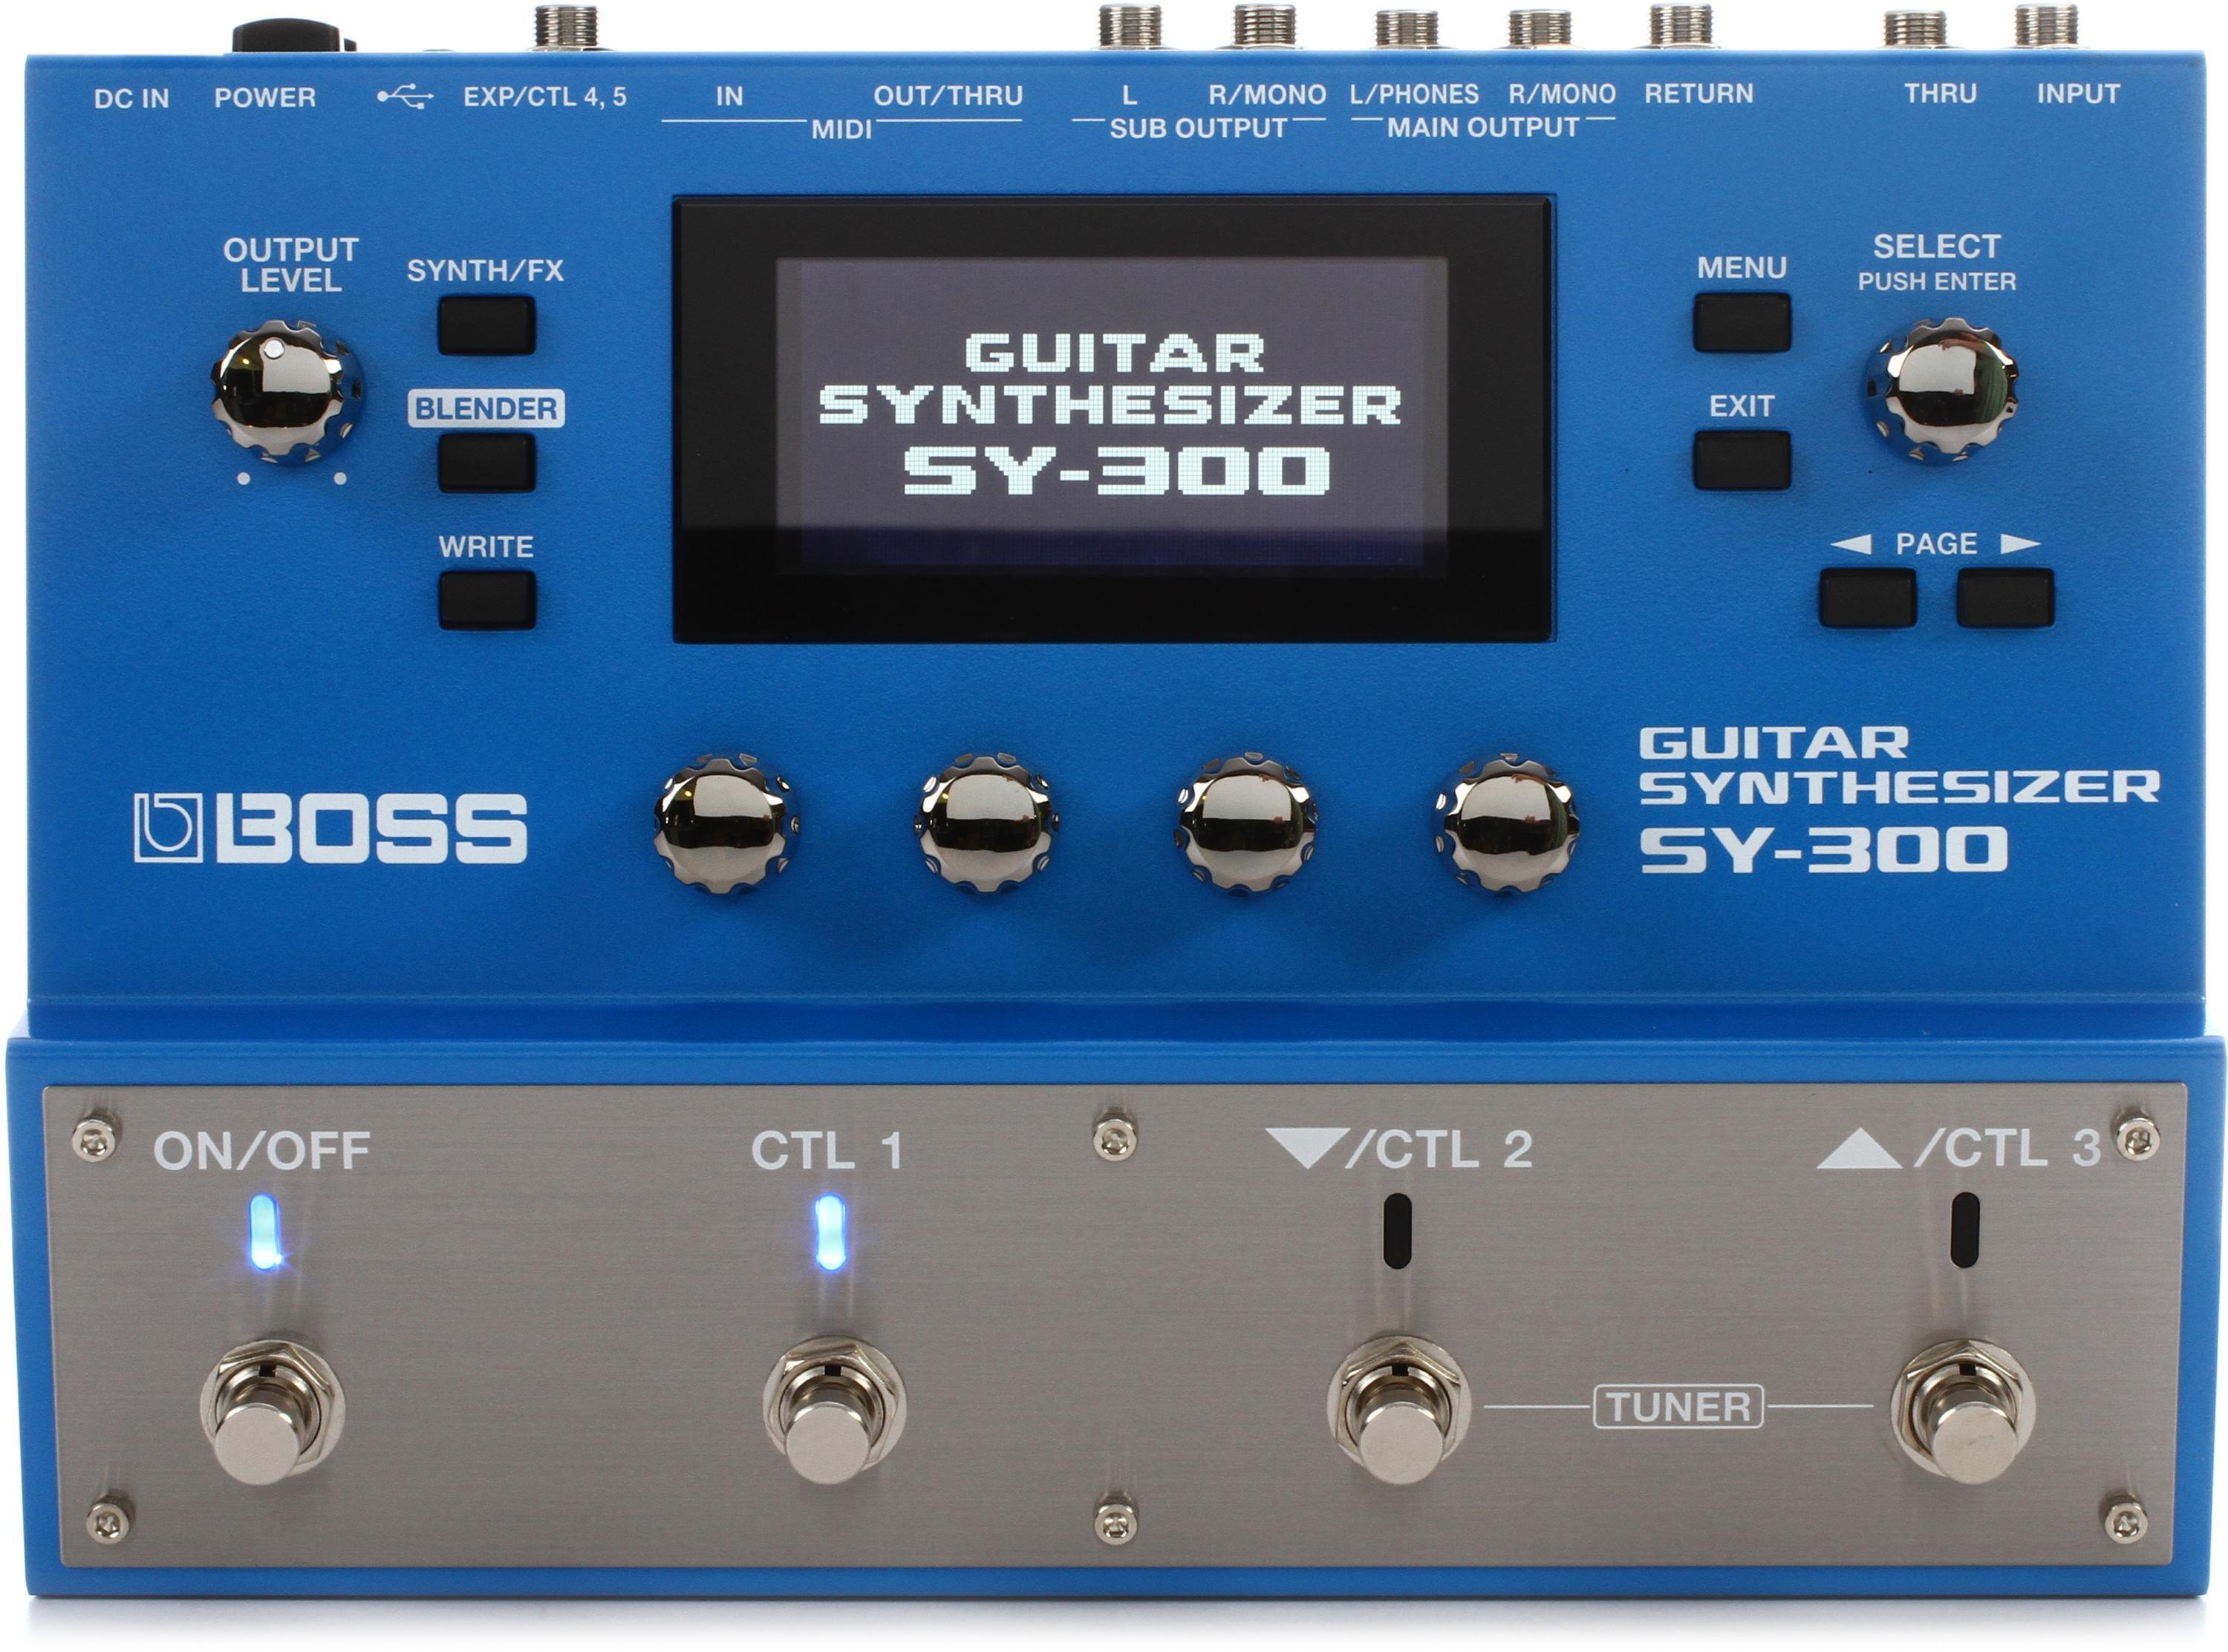 SY-300 GUITAR SYNTHESIZER